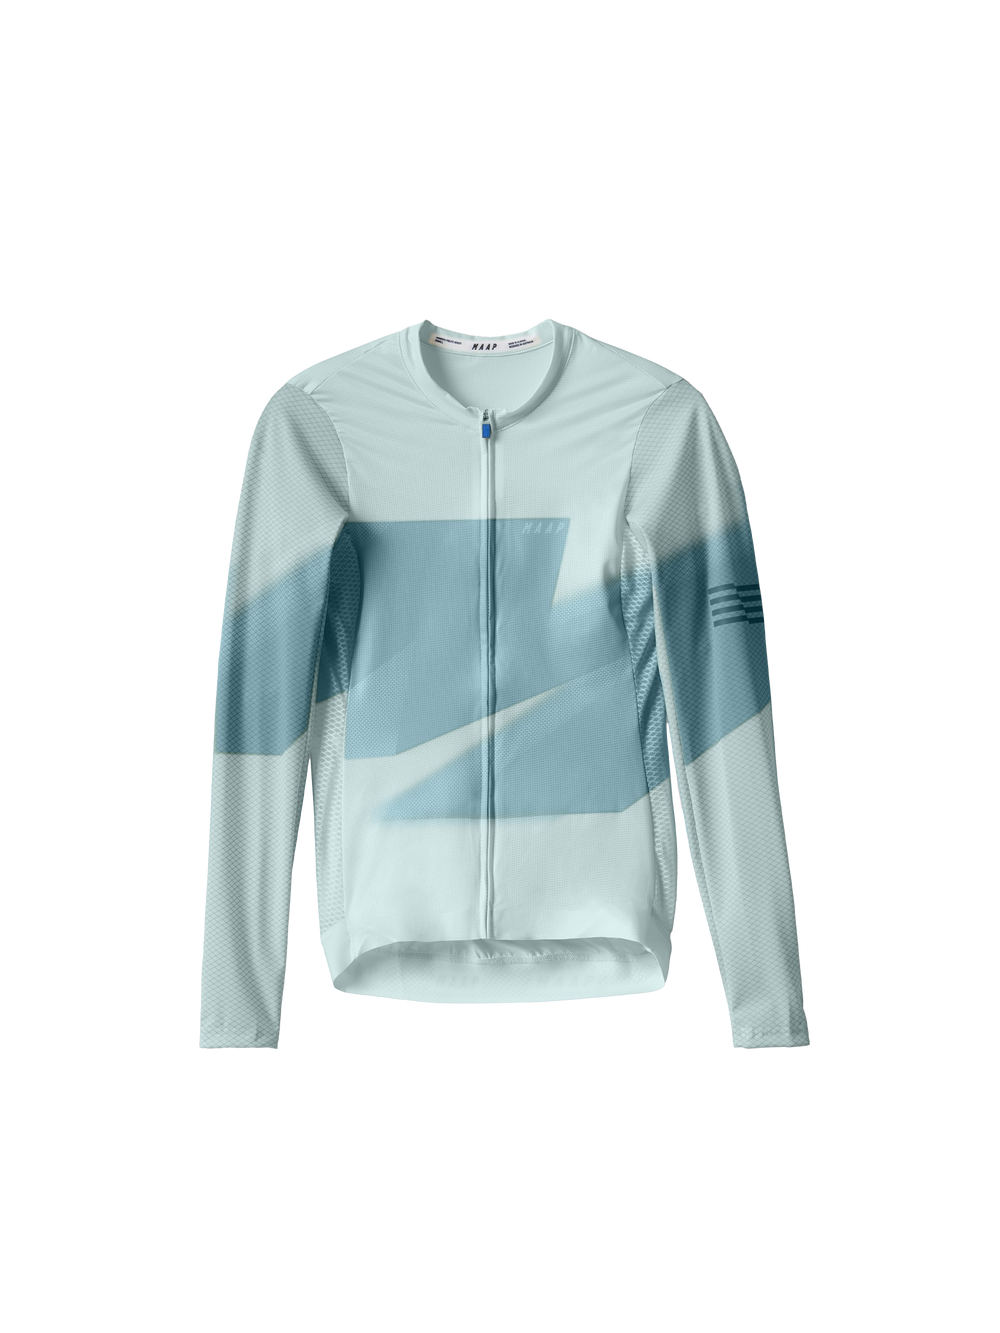 Product Image for Women's Evolve Pro Air LS Jersey 2.0